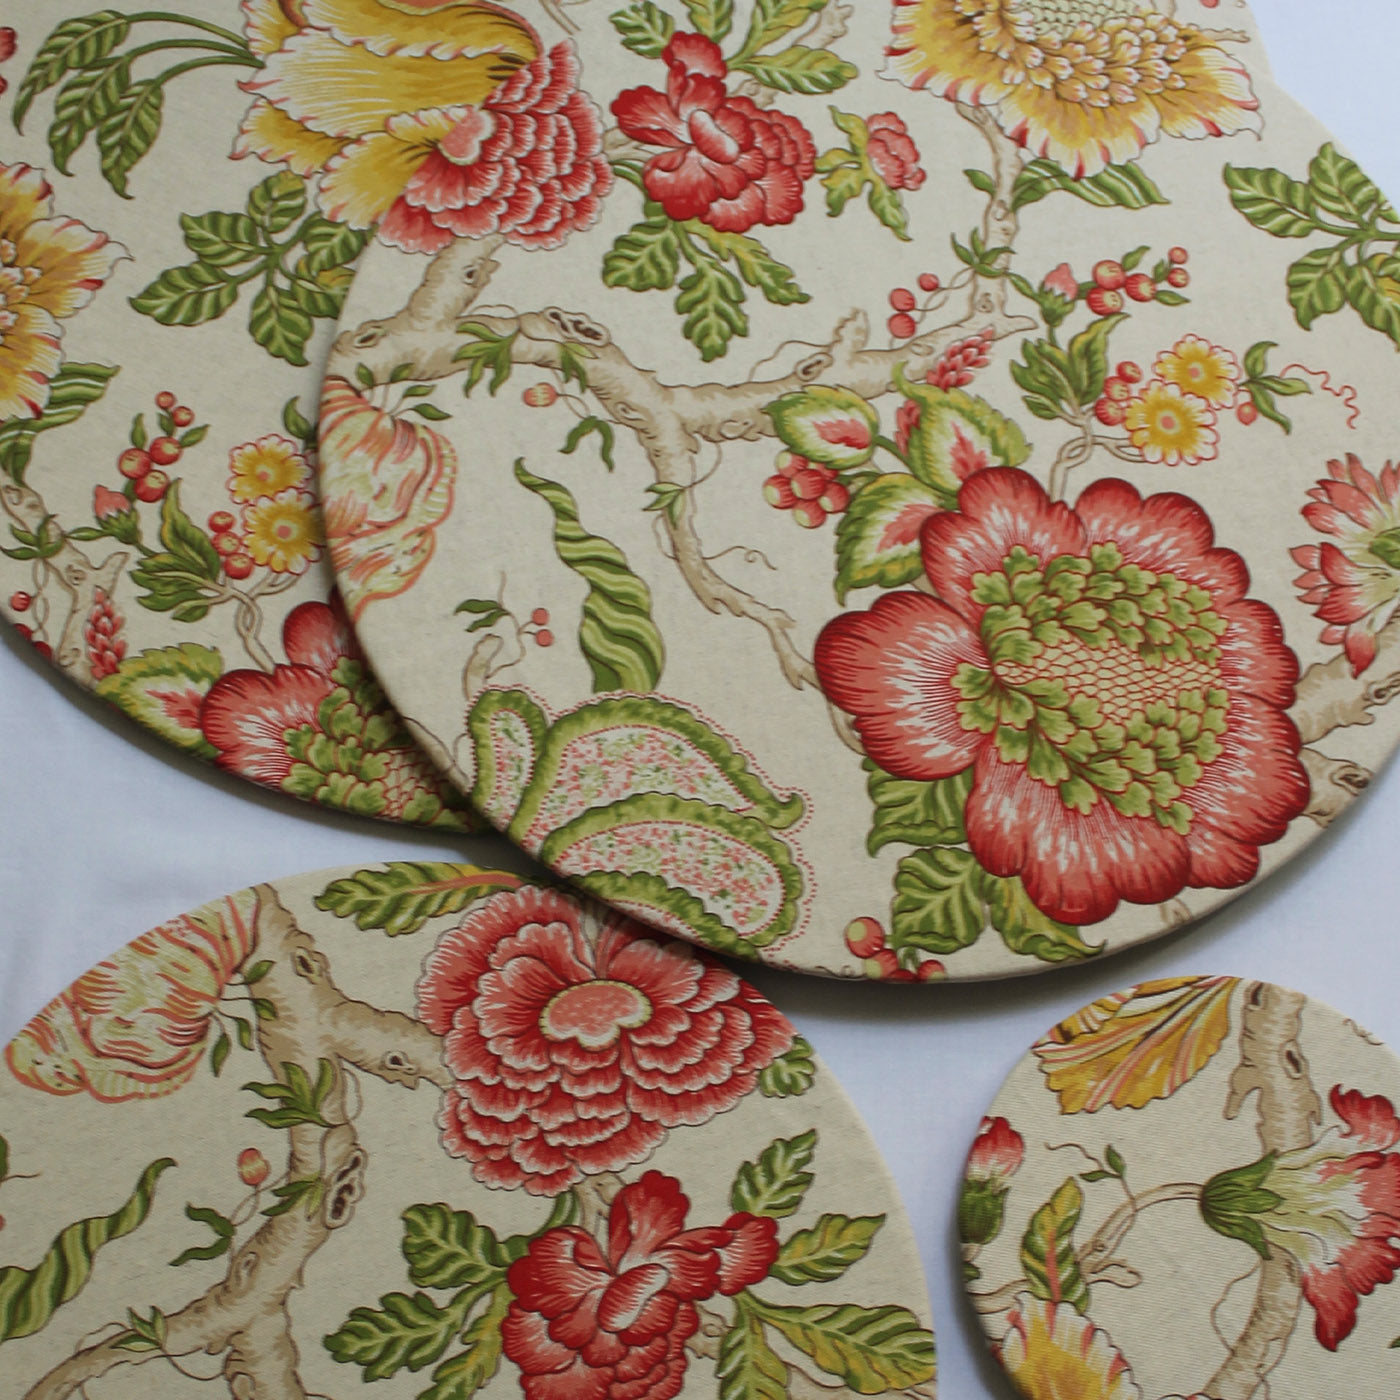 Set of 2 Cuffiette Extra-Small Round Floral Placemats #2 - Alternative view 1